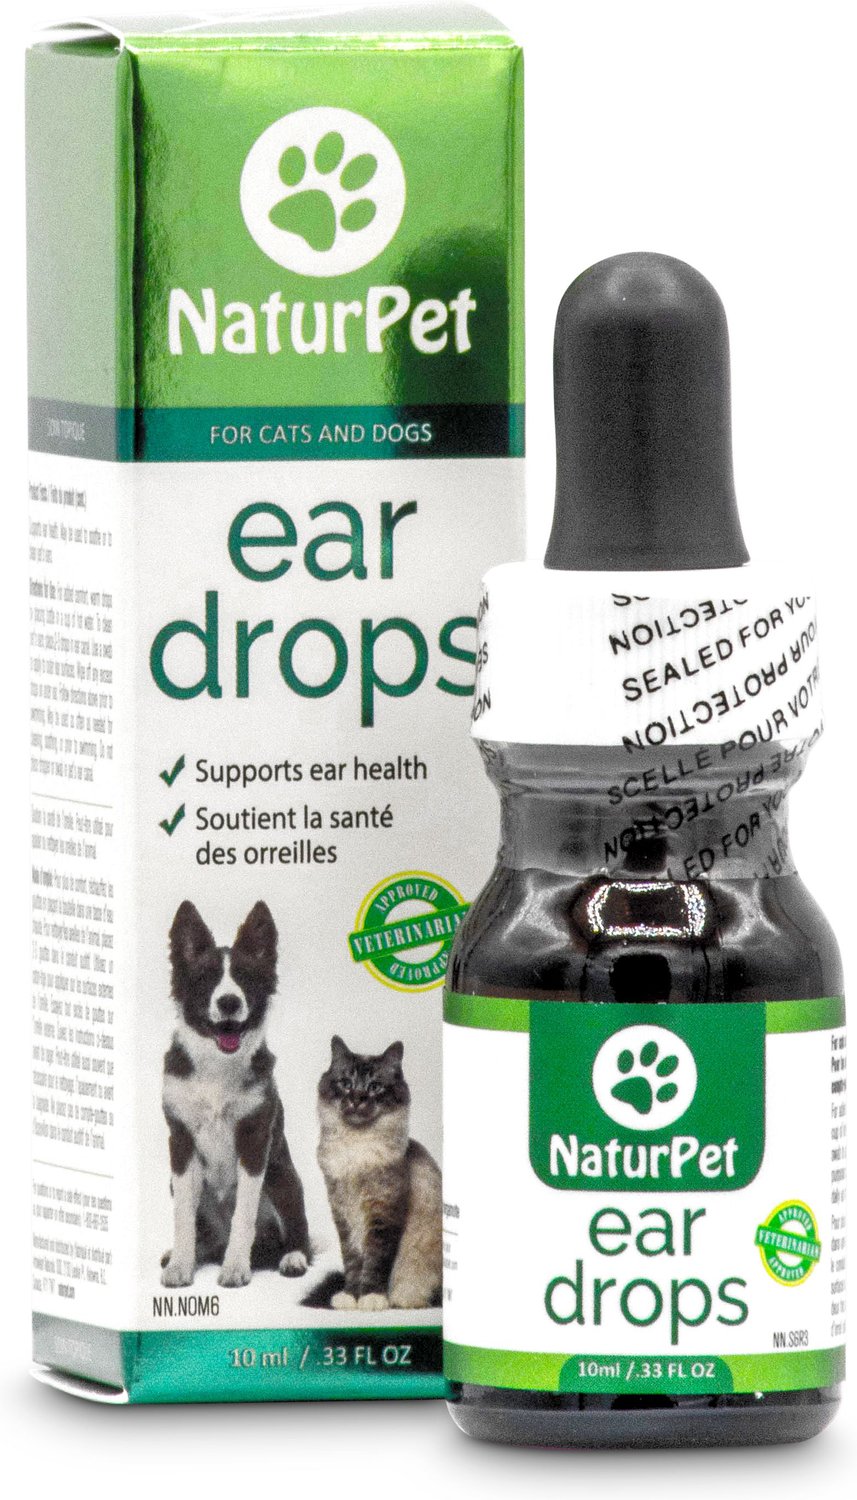 NaturPet Ear Drops Homeopathic Medicine for Ear Infections